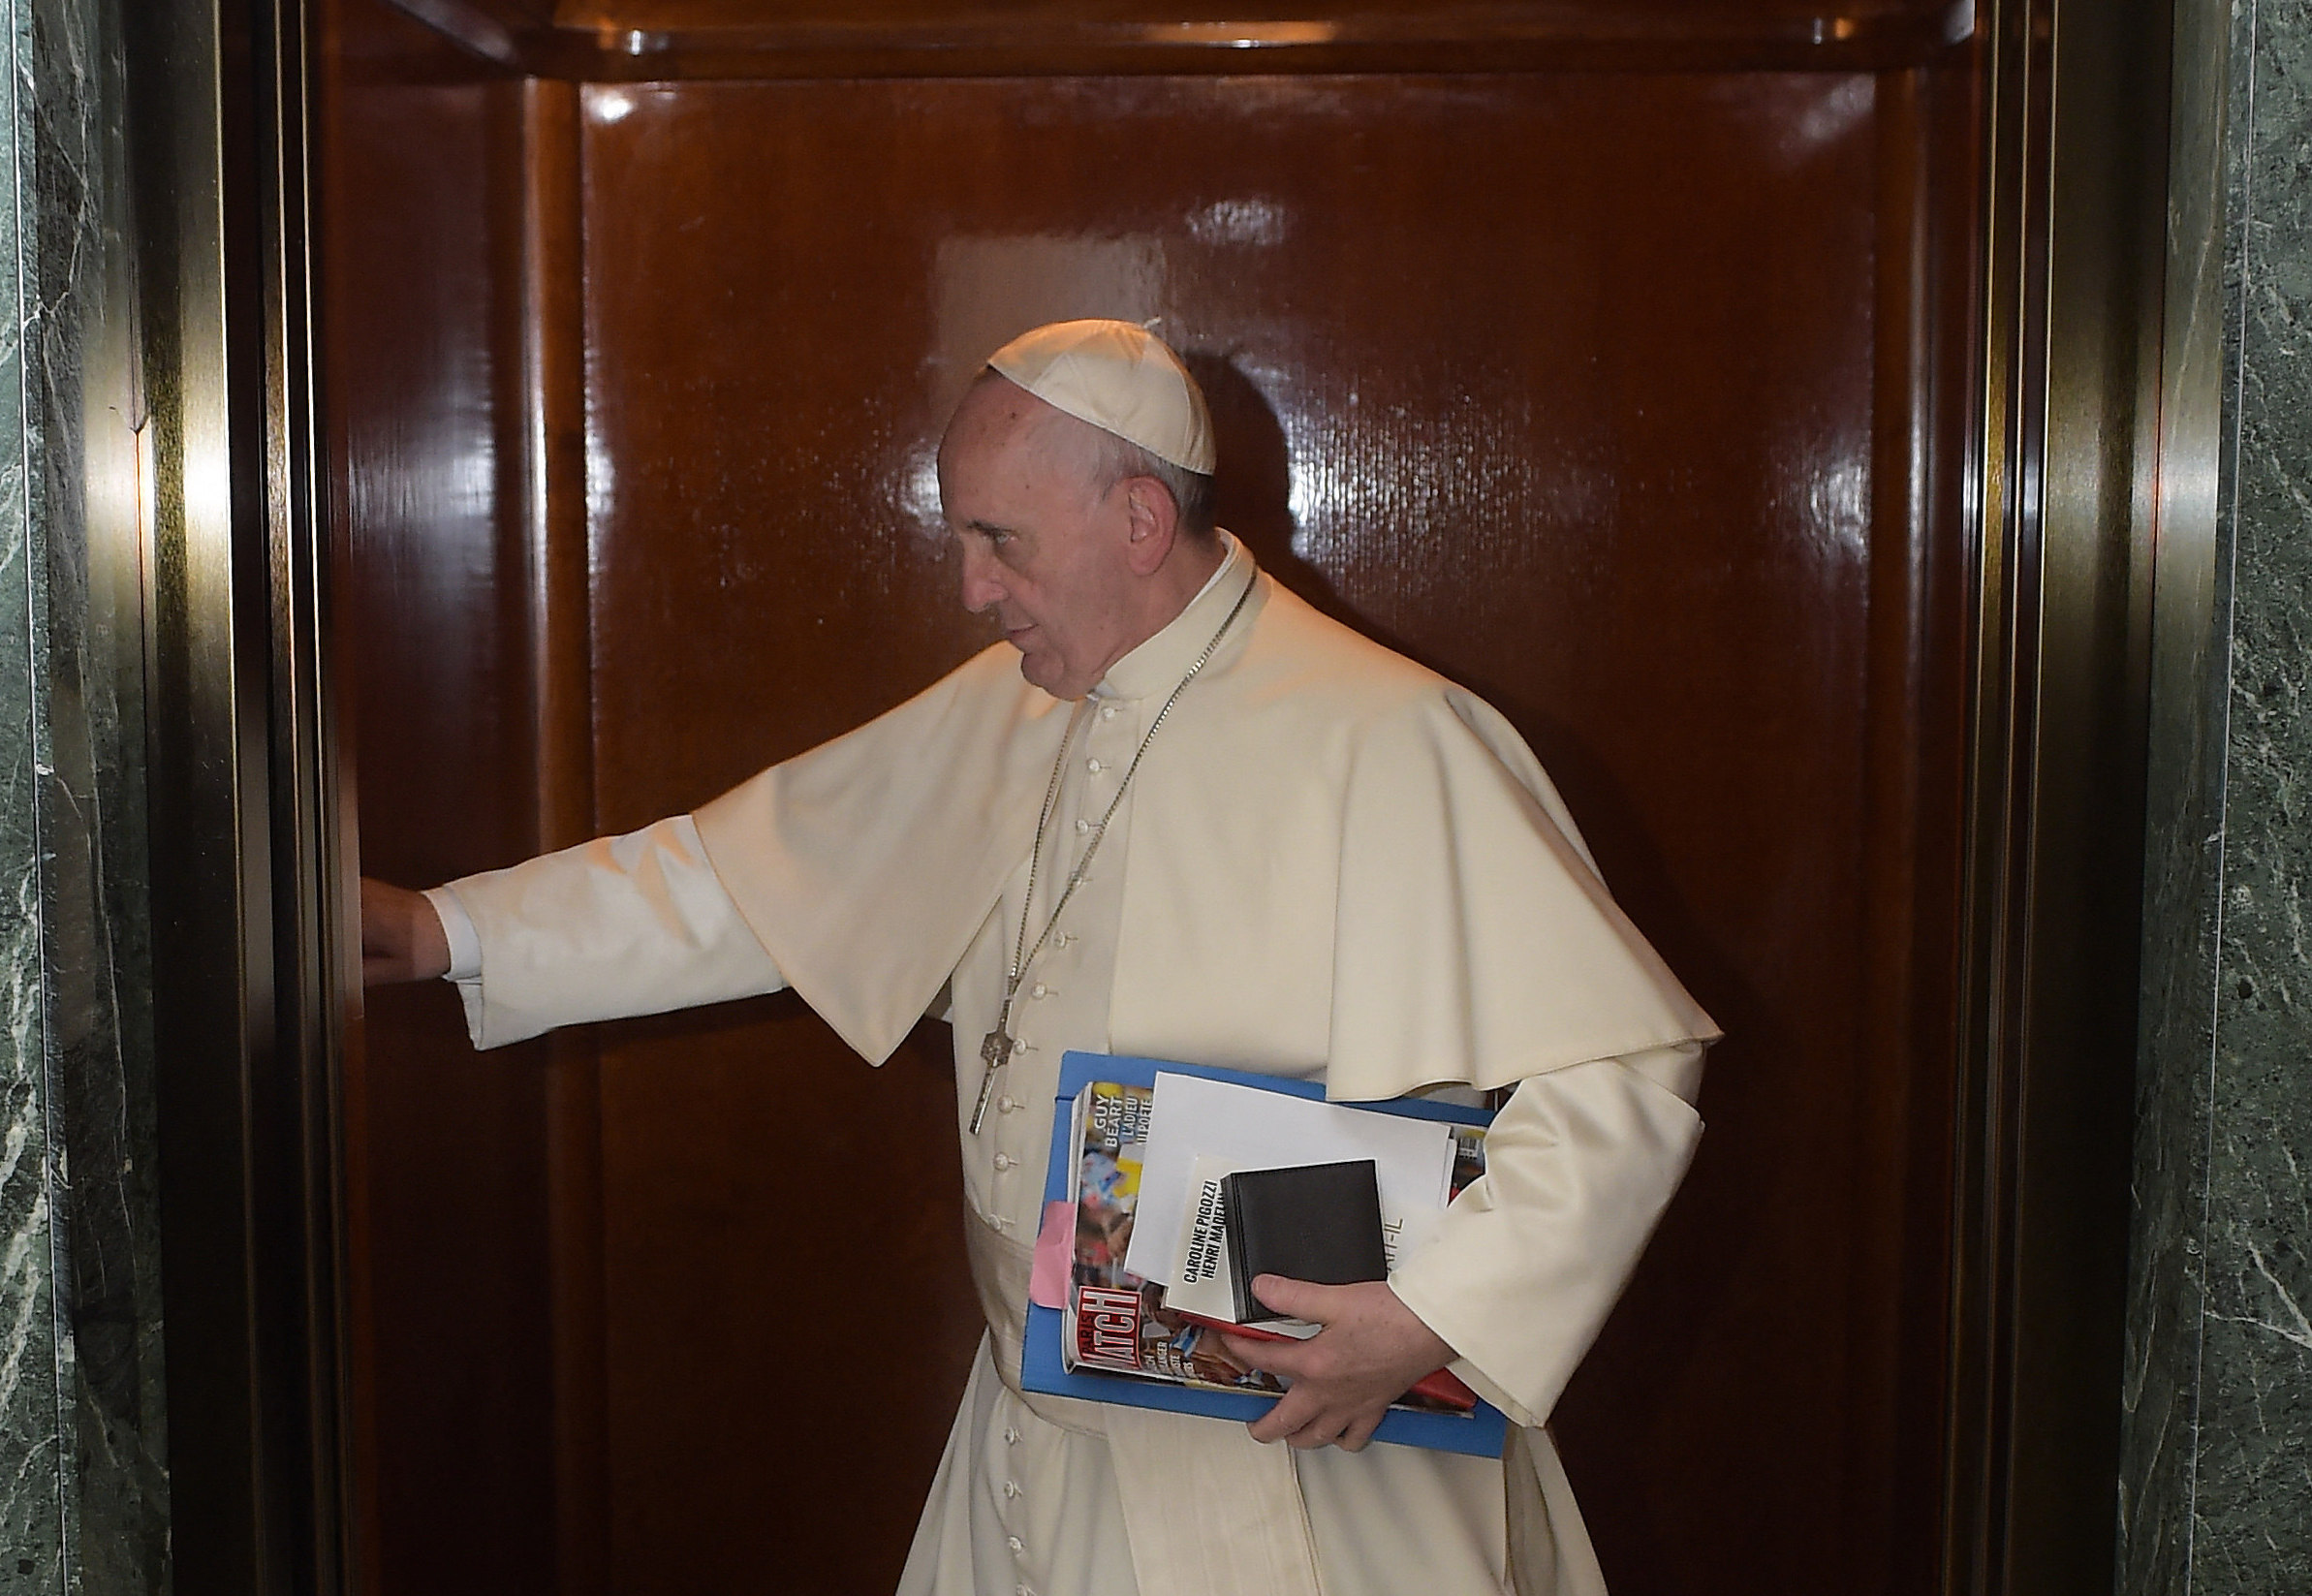 The Pope Got Trapped In A Lift For 25 Minutes, Proving God Works In Mysterious Ways